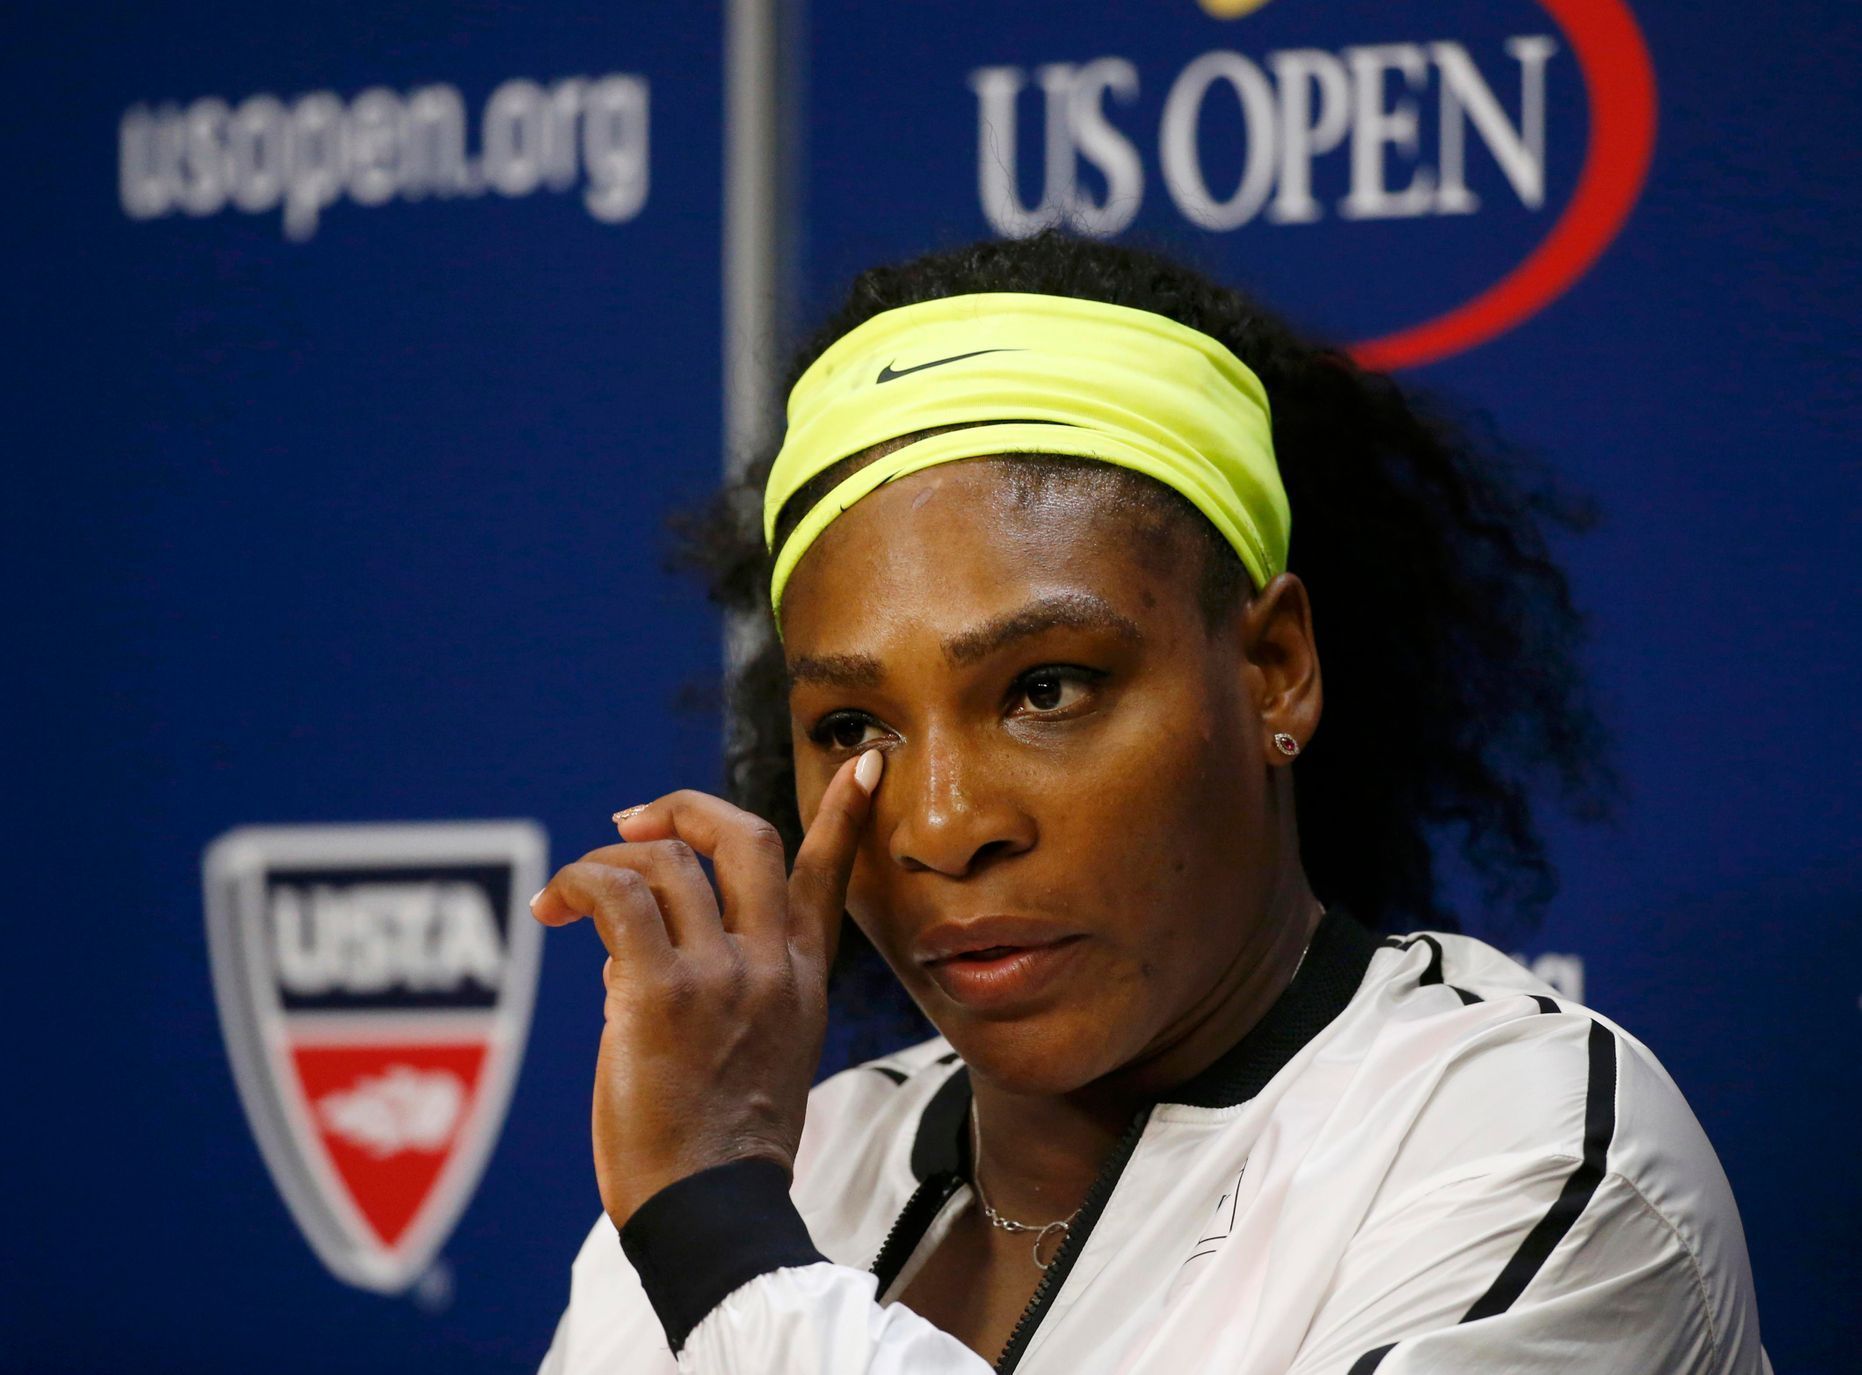 Williams of the U.S. listens to a reporter's question during a post-match press conference following her loss to Vinci of Italy in their women's singles semi-final match at the U.S. Open Championships